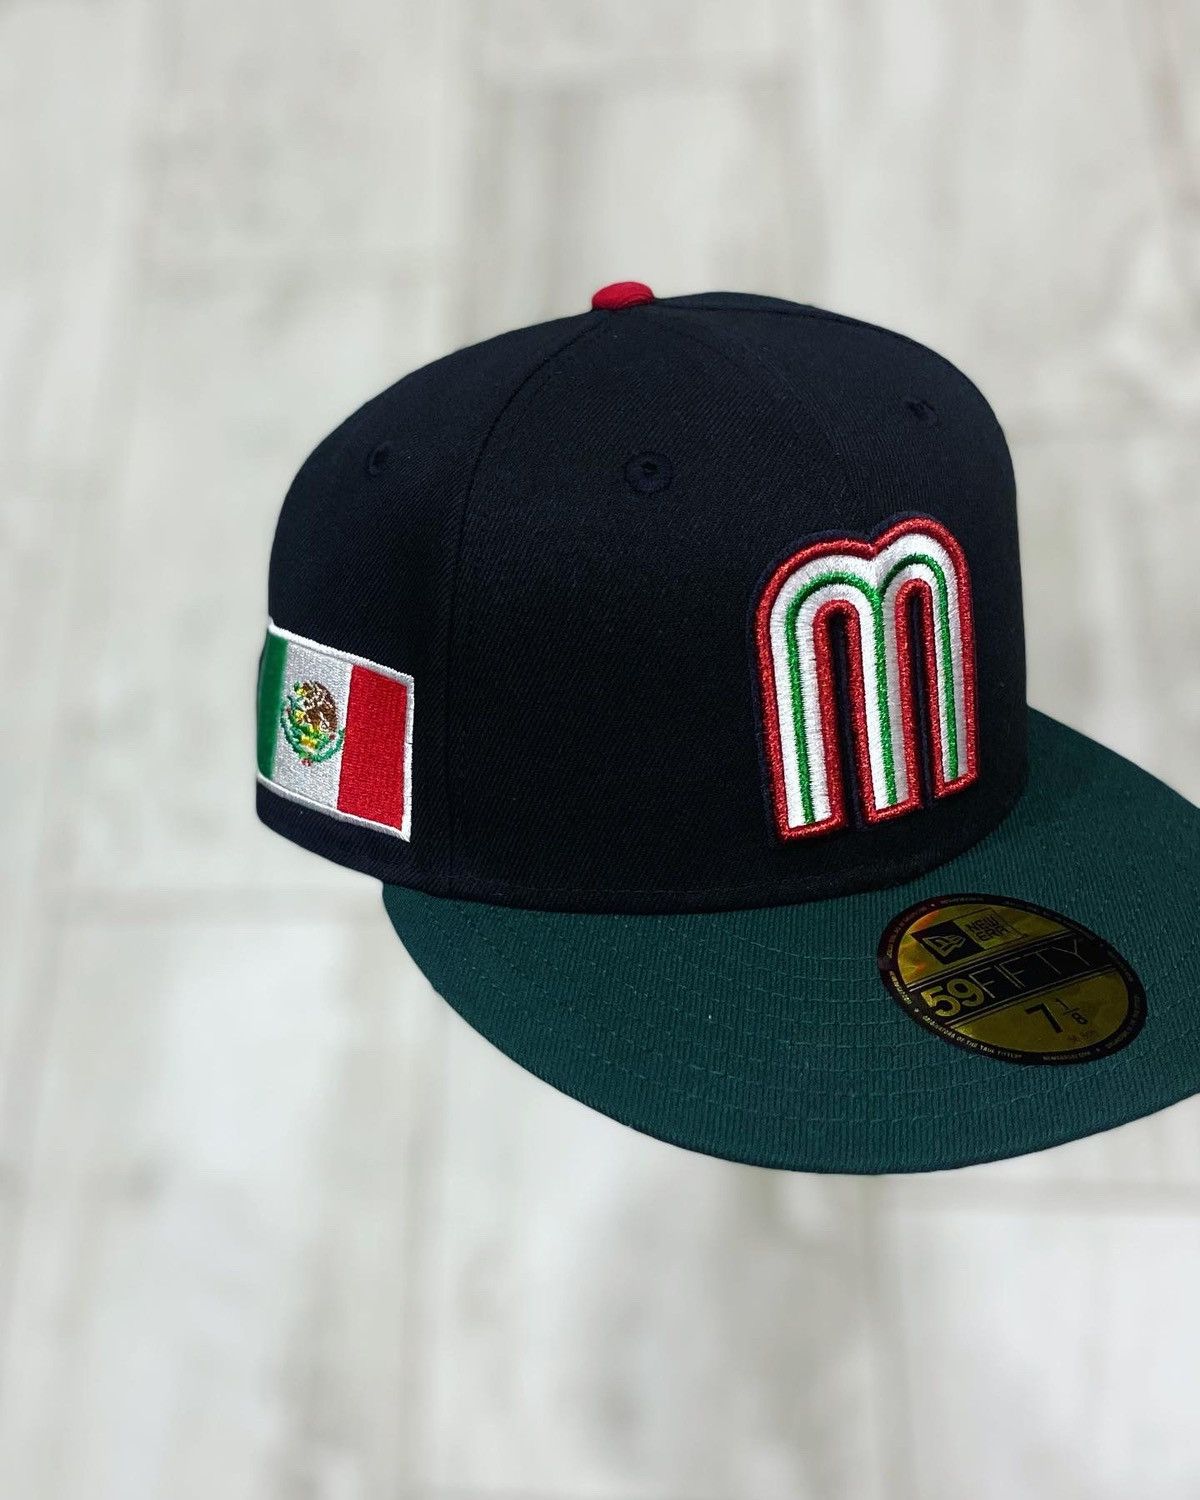 New Era Hatclub Mexico WBC 7 1/8 Fitted hat | Grailed